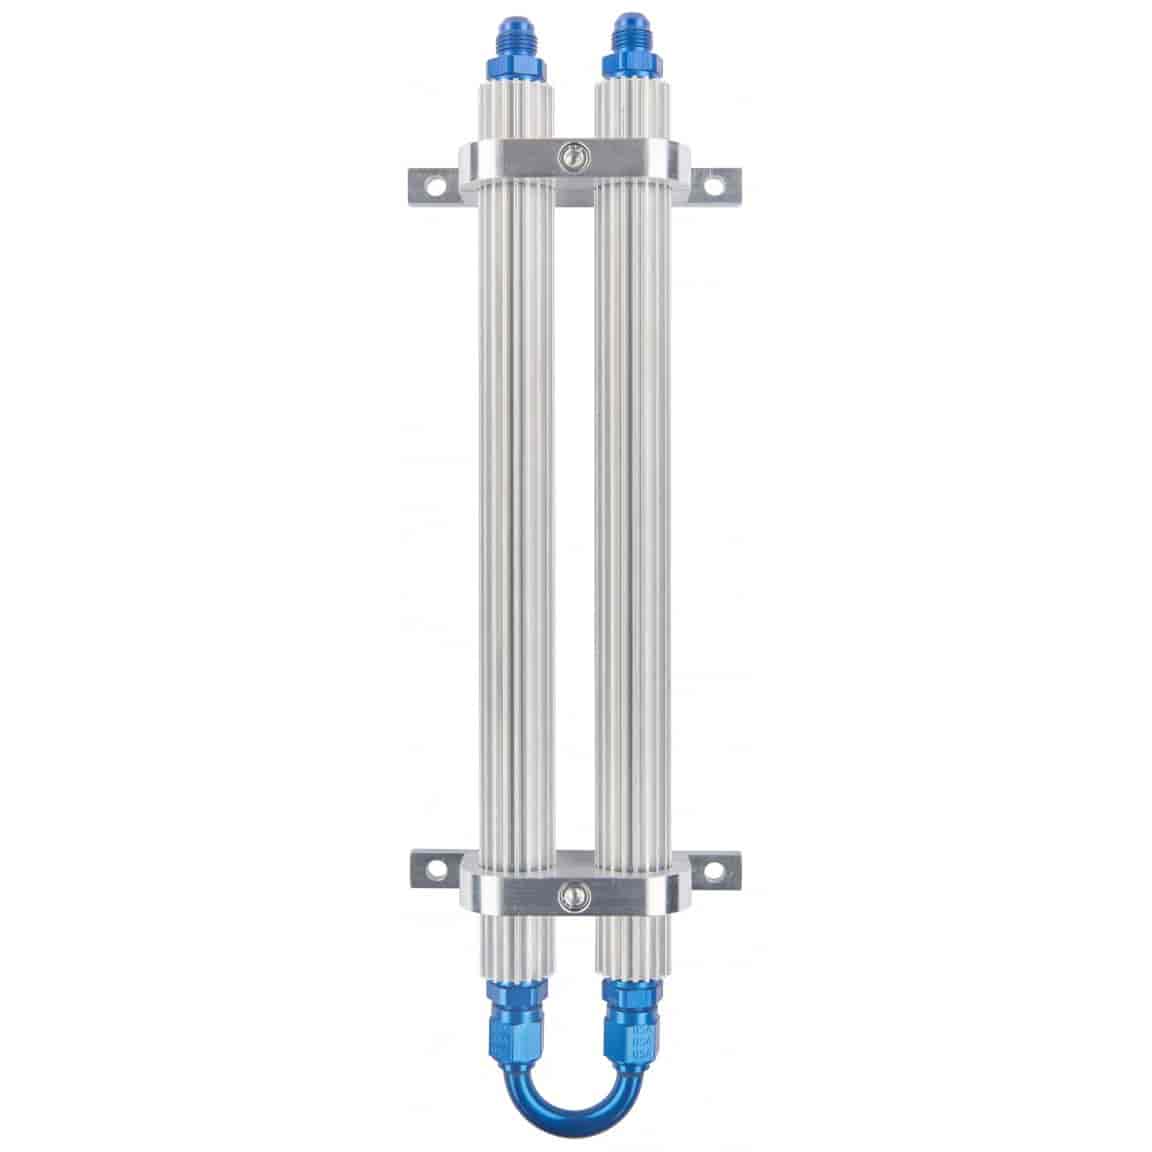 Thermo Flow Modular Fluid Cooler [2-Tube]